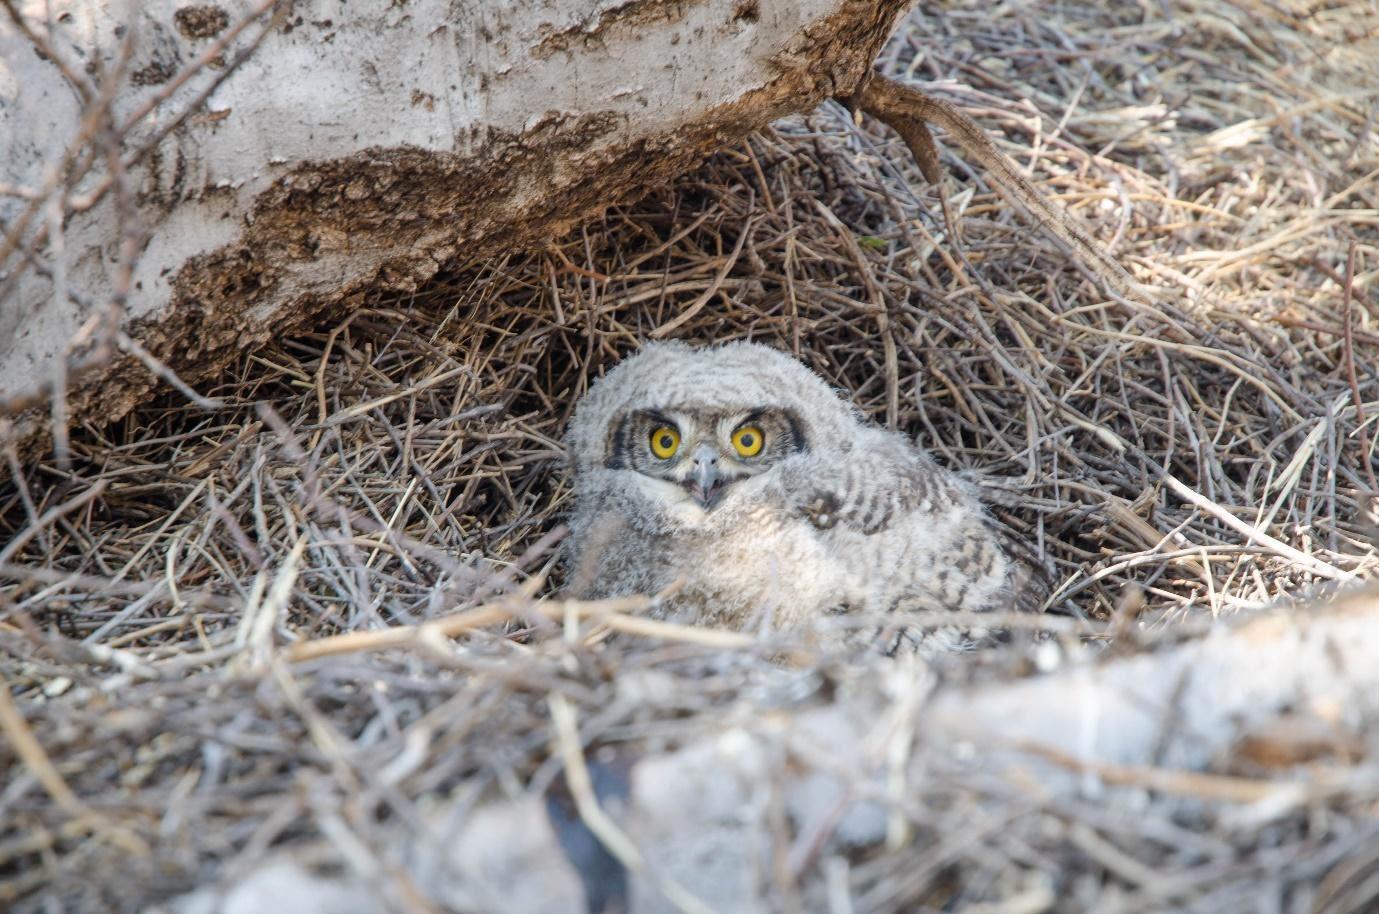 Spotted eagle owl chick